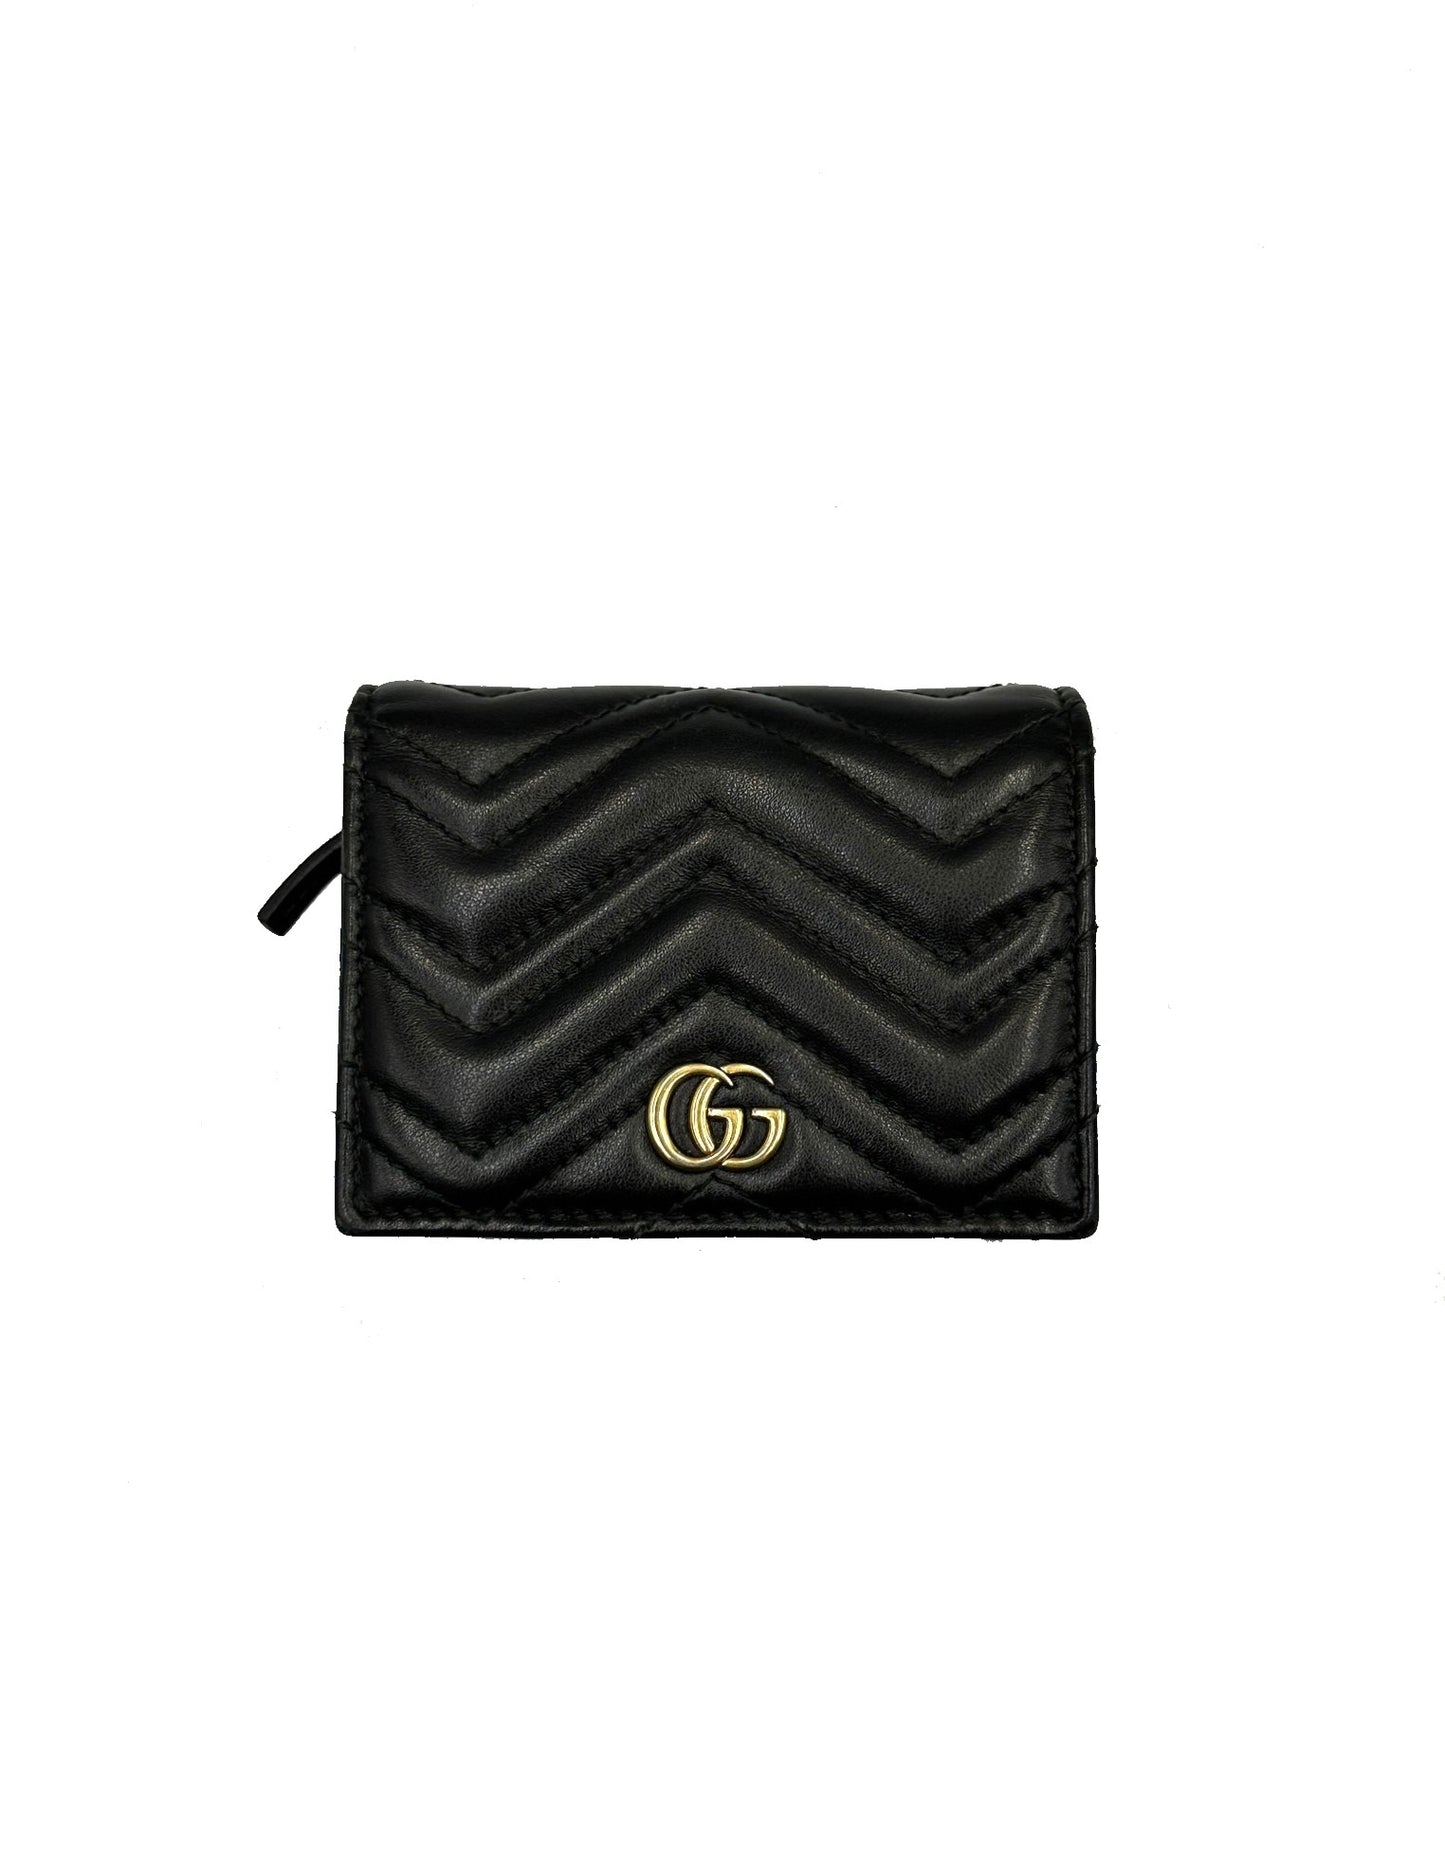 【Preowned】GUCCI Marmont 短夾 - 黑